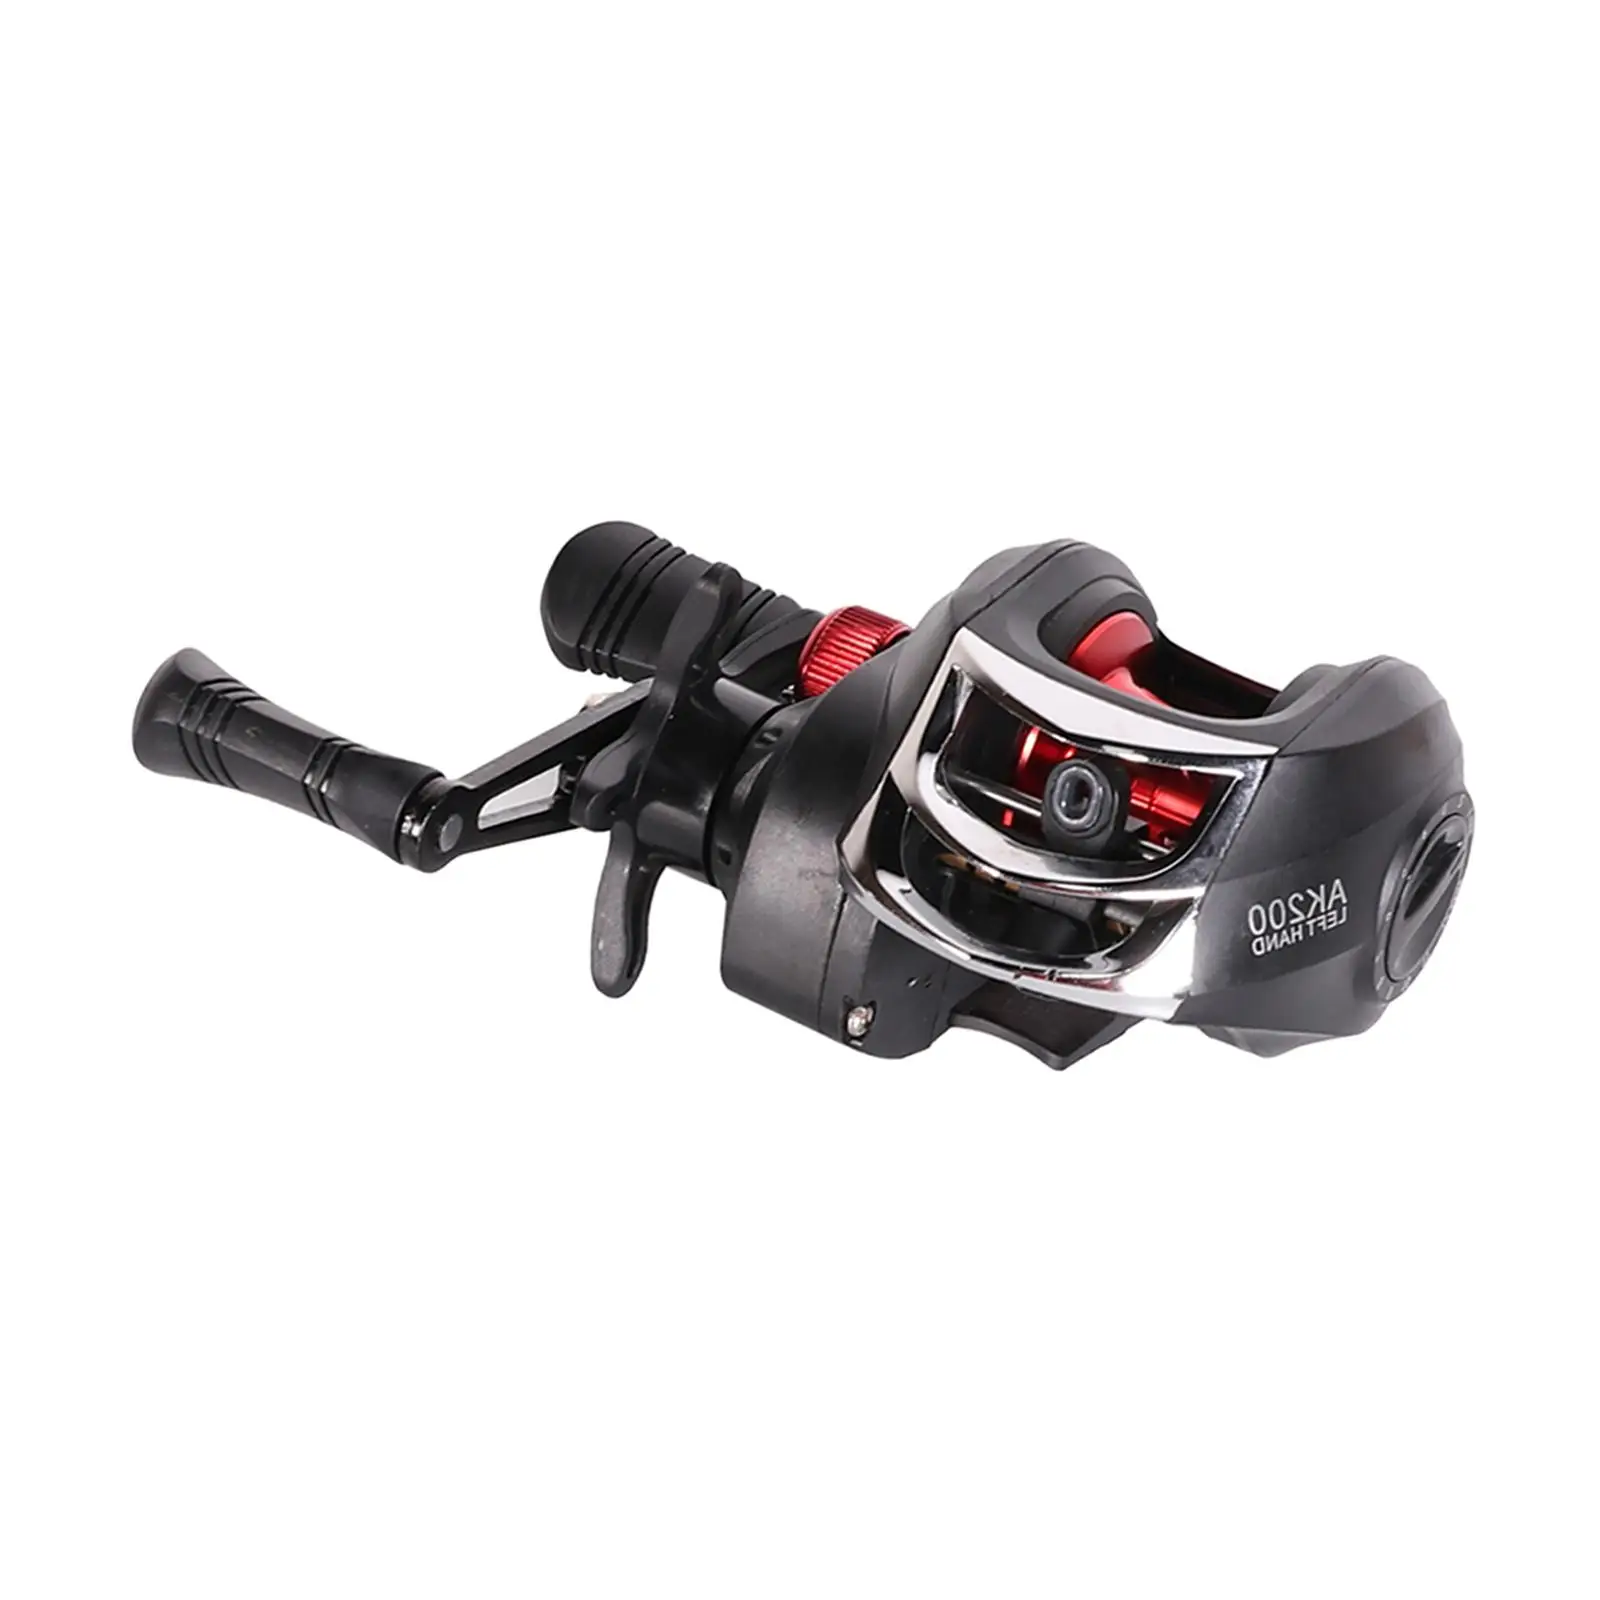 ing 2lbs/10Kg Max Drag 7.2:1 ers Unequaled High-tech   Fishing Reels for Freshwater Saltwater Casting Reels